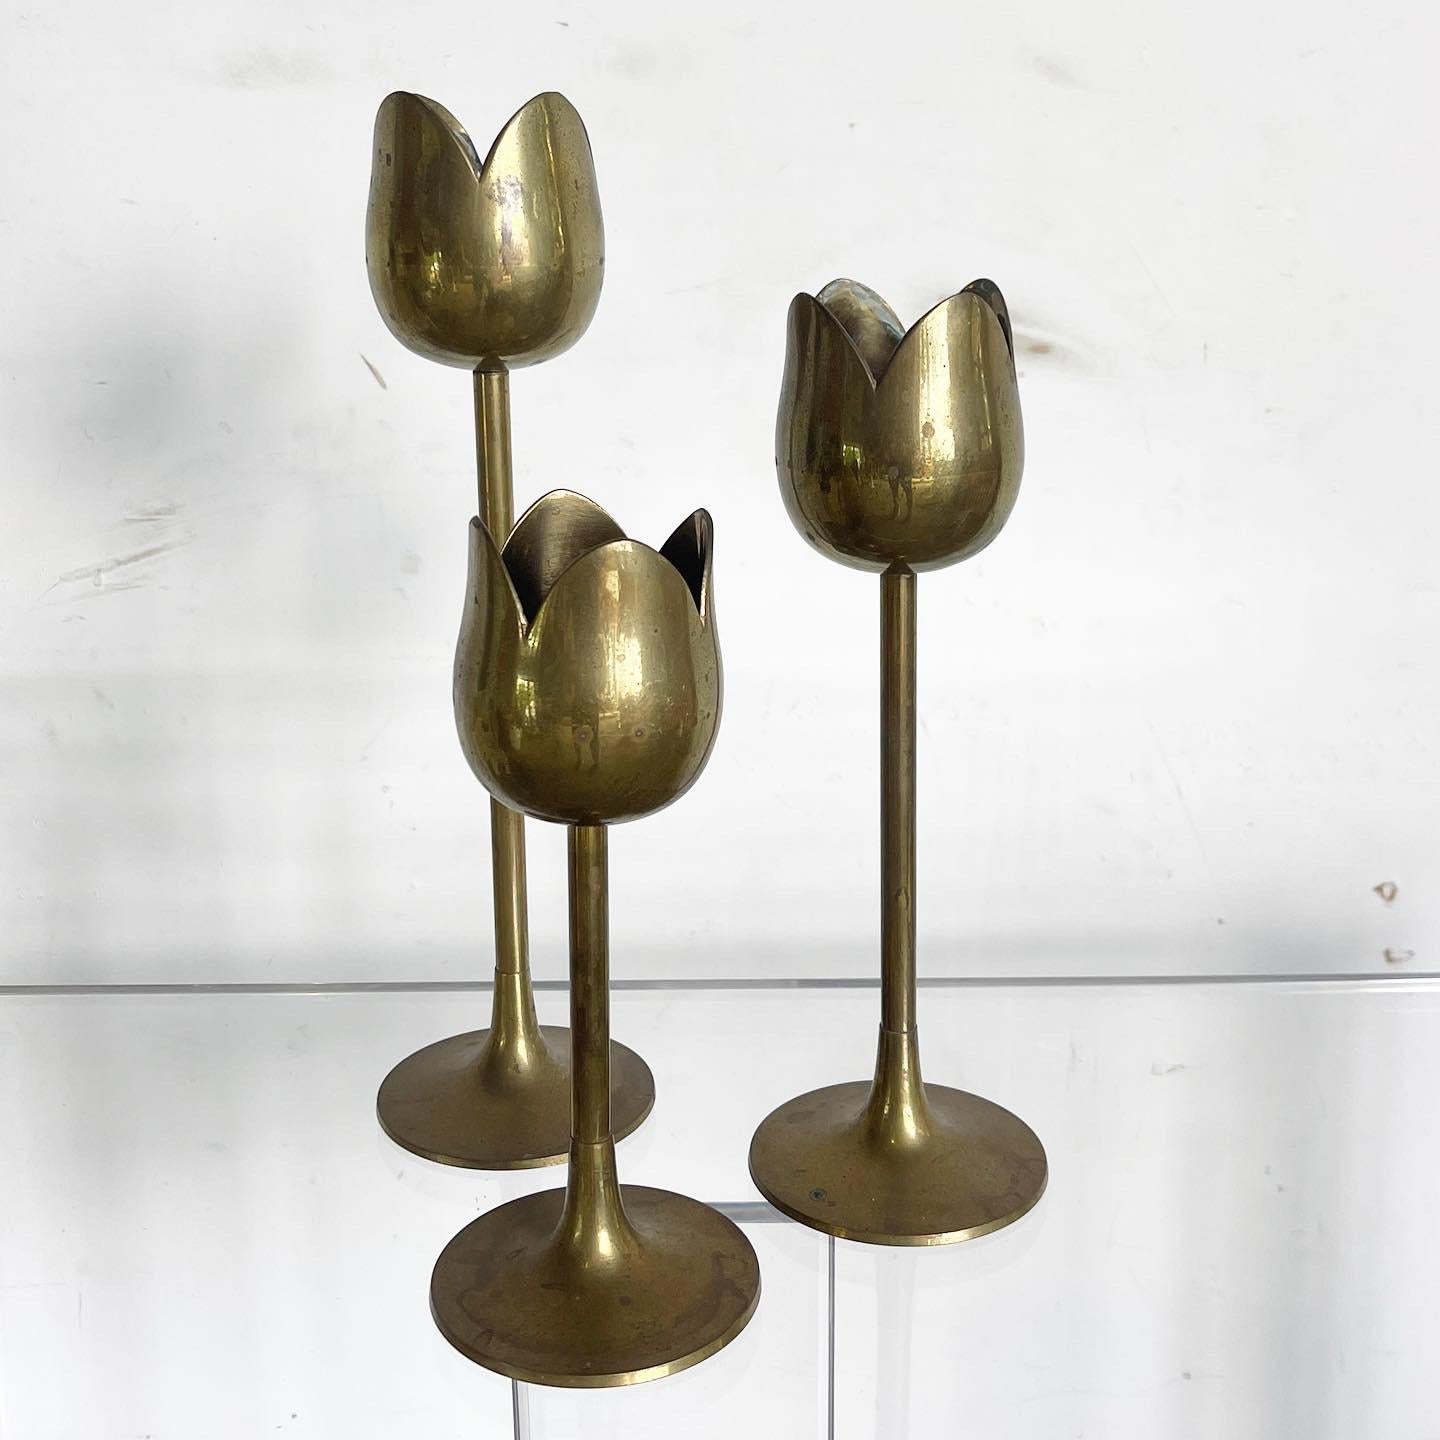 Experience timeless elegance with the Brass Tulip Candlestick Holders, set of 3, showcasing sleek curves and minimalist aesthetics. Gracefully crafted from polished brass, these mid-century modern pieces add a chic, understated touch, perfect for